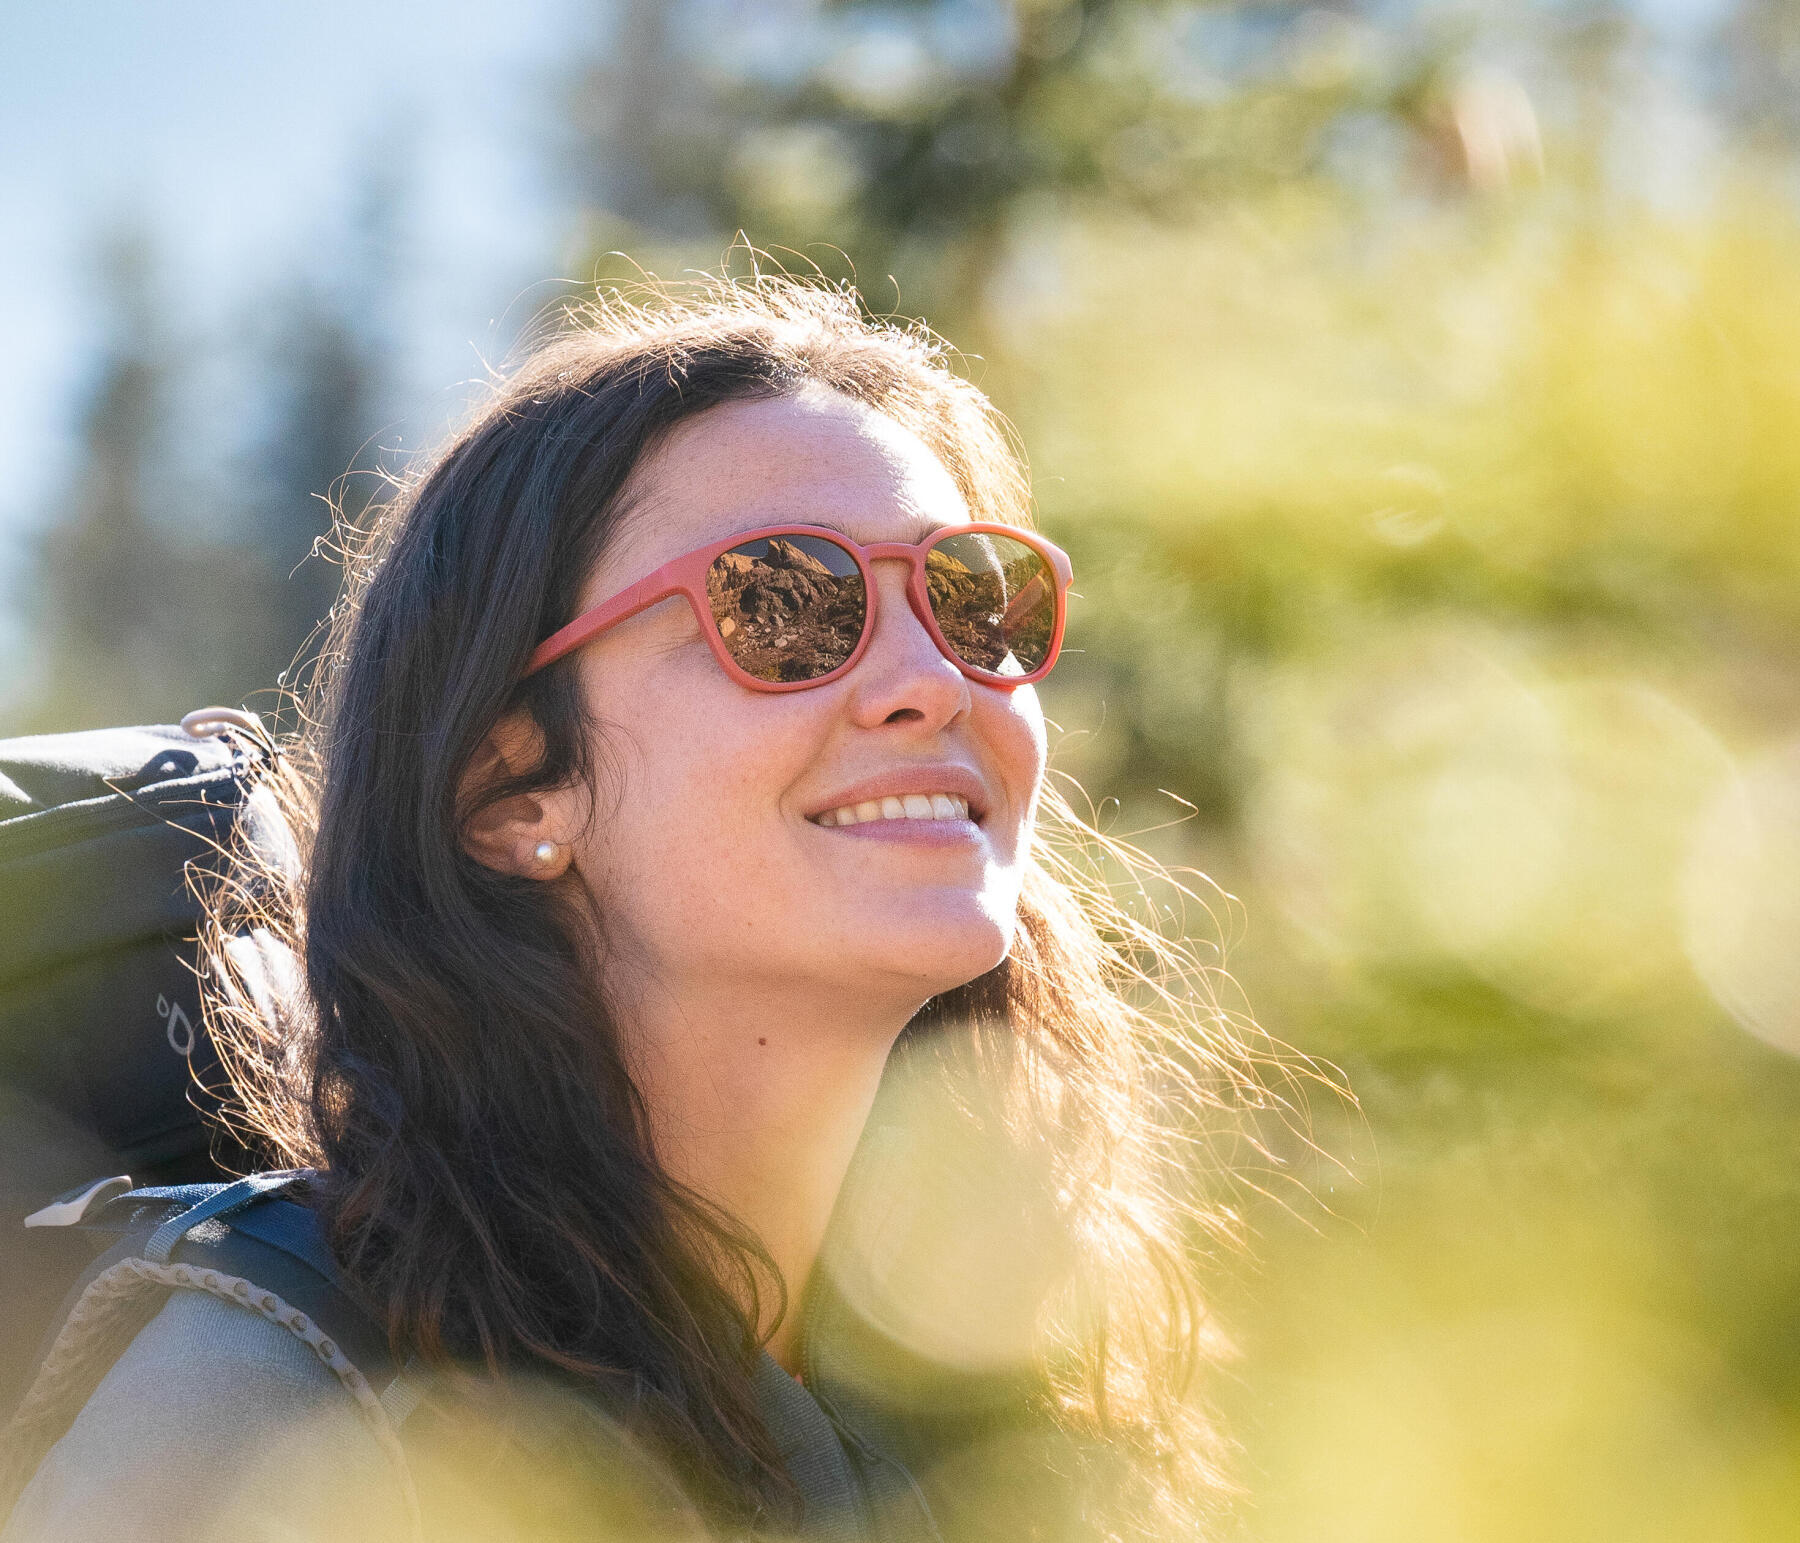 MH530 SUNGLASS from Quechua by Decathlon | Our optical engineers developed  these sunglasses for regular use thanks to their lightness & support.  Anti-UV lenses block out 100% of the sun's harmful... |